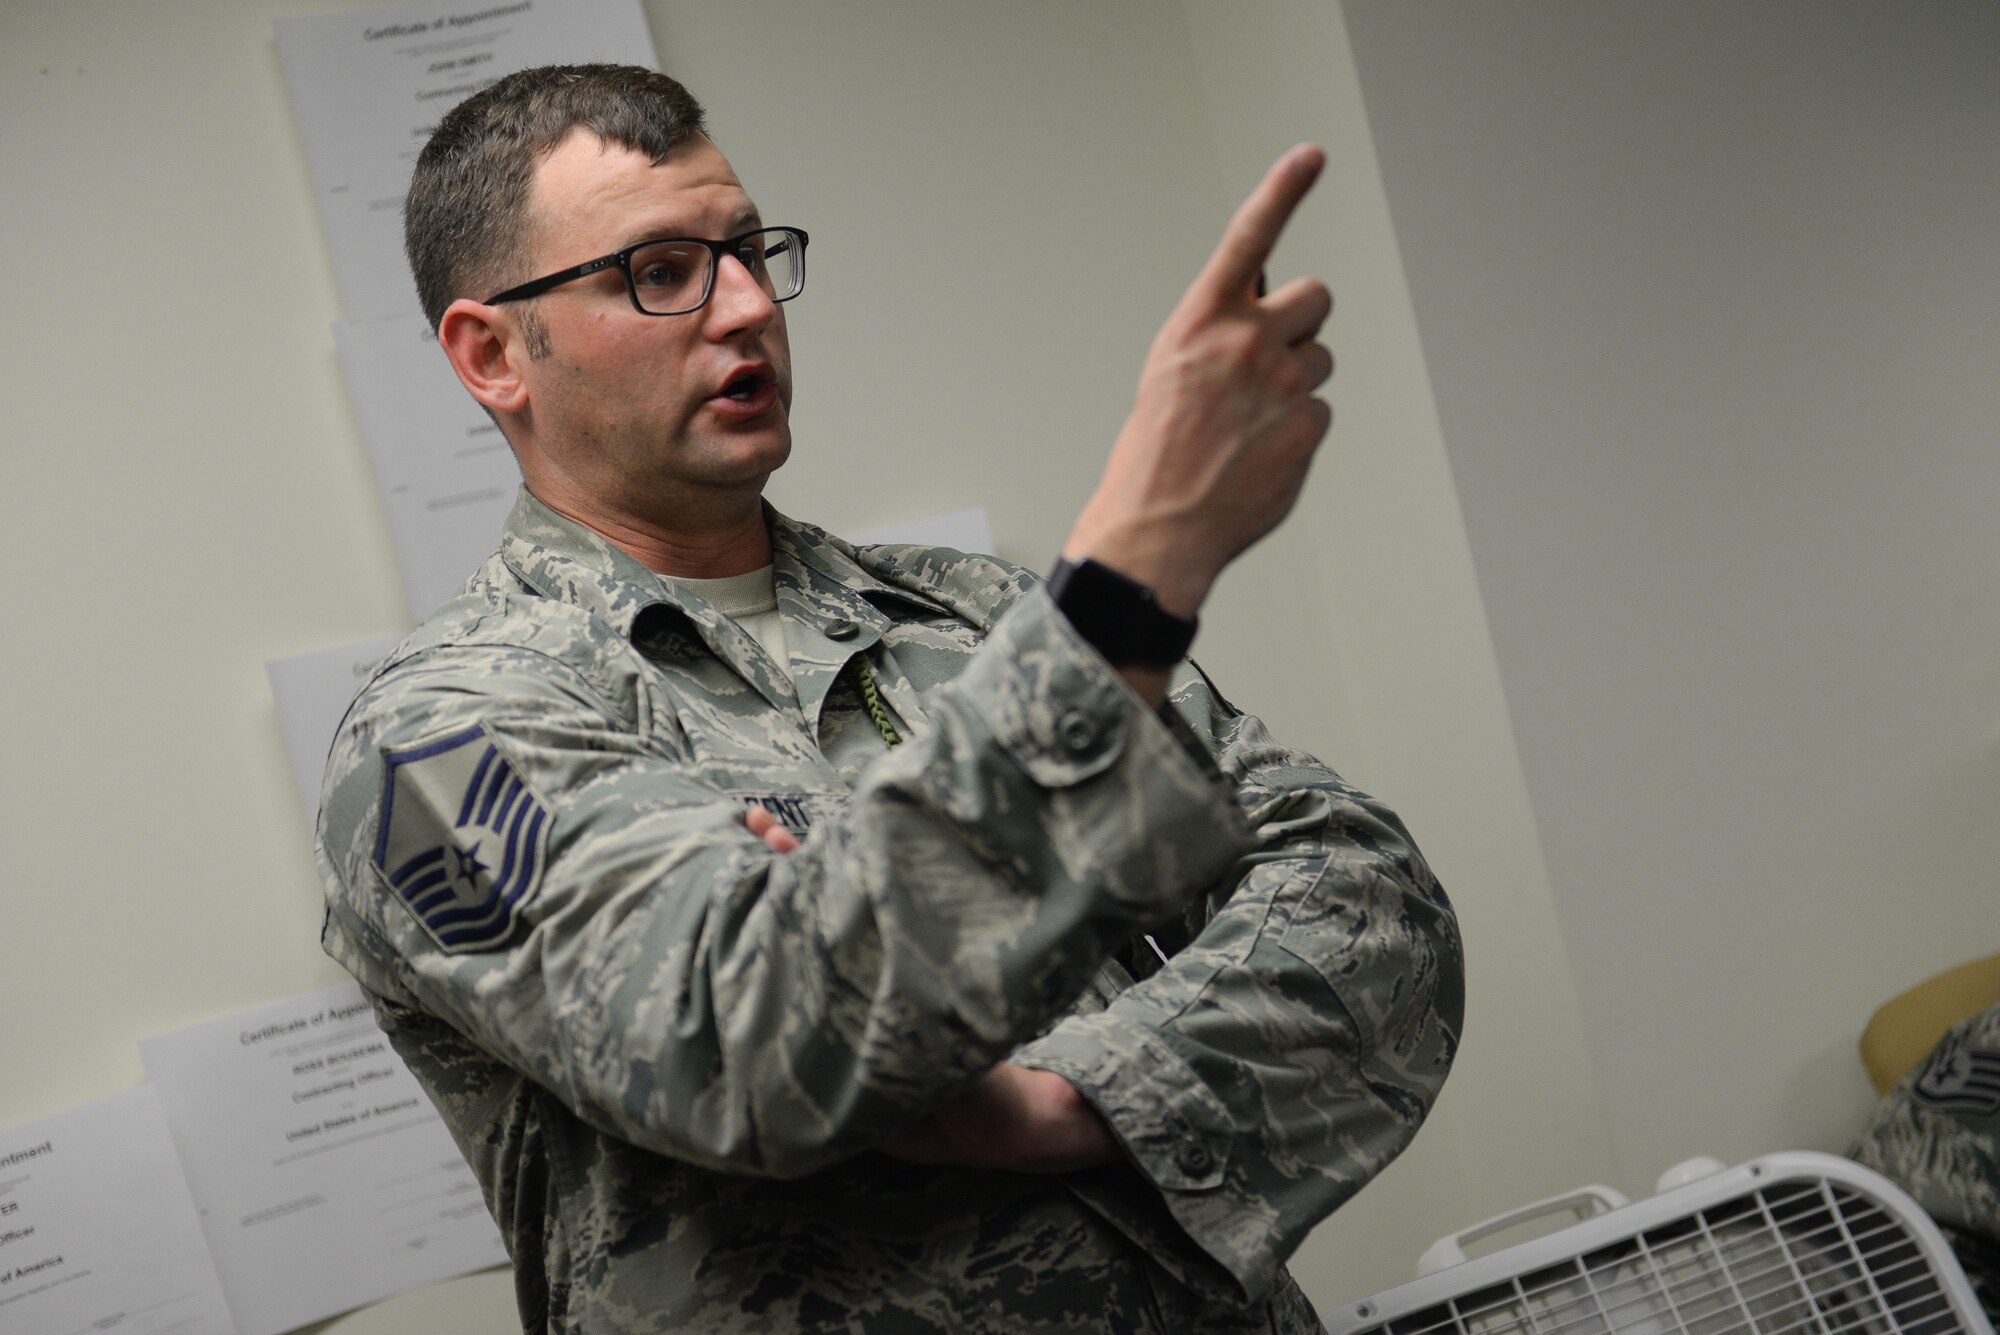 MSgt. James Arent, 55th Security Forces Squadron NCOIC of training, conducts convoy contingency training for Airmen assigned to the 55th Contracting Squadron at Offutt Air Force Base, Neb., May 10, 2017. Airmen participated in classroom instruction, with an in-depth discussion about what to expect in a deployed environment and how to properly handle different scenarios. (U.S. Air Force photo by Zachary Hada)